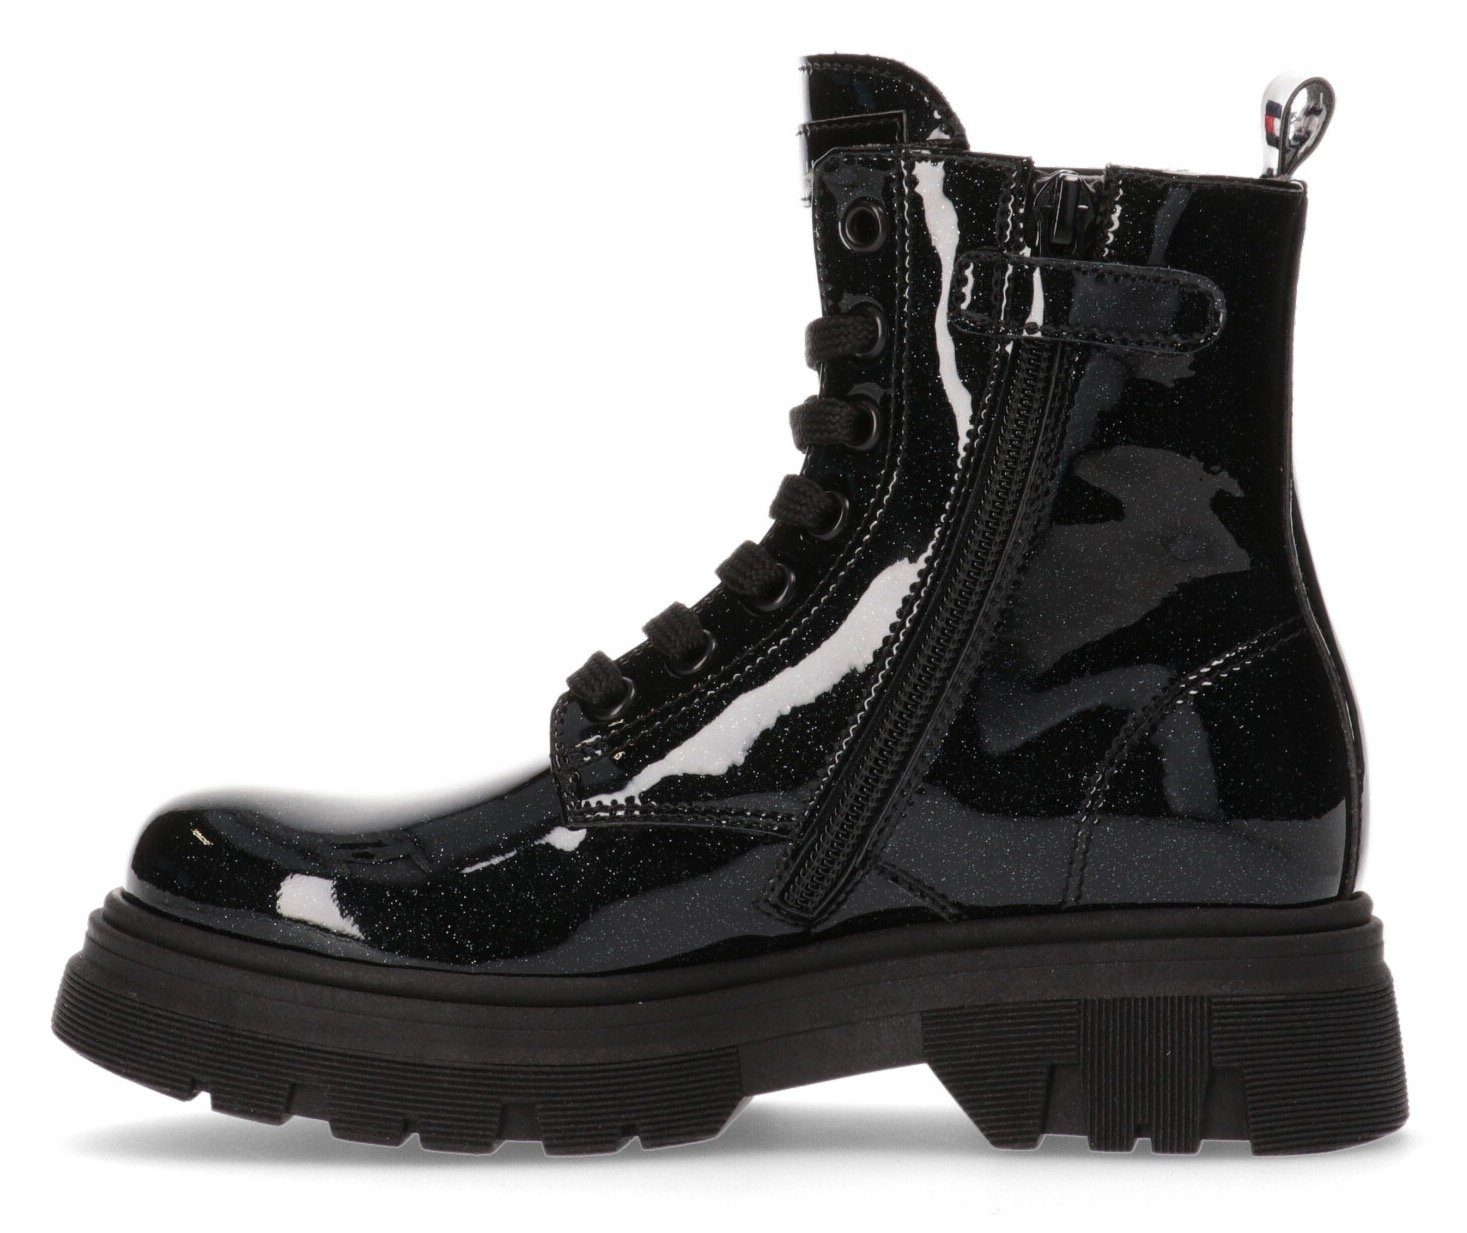 Tommy Hilfiger LACE-UP BOOT Schnürboots Plateausohle mit